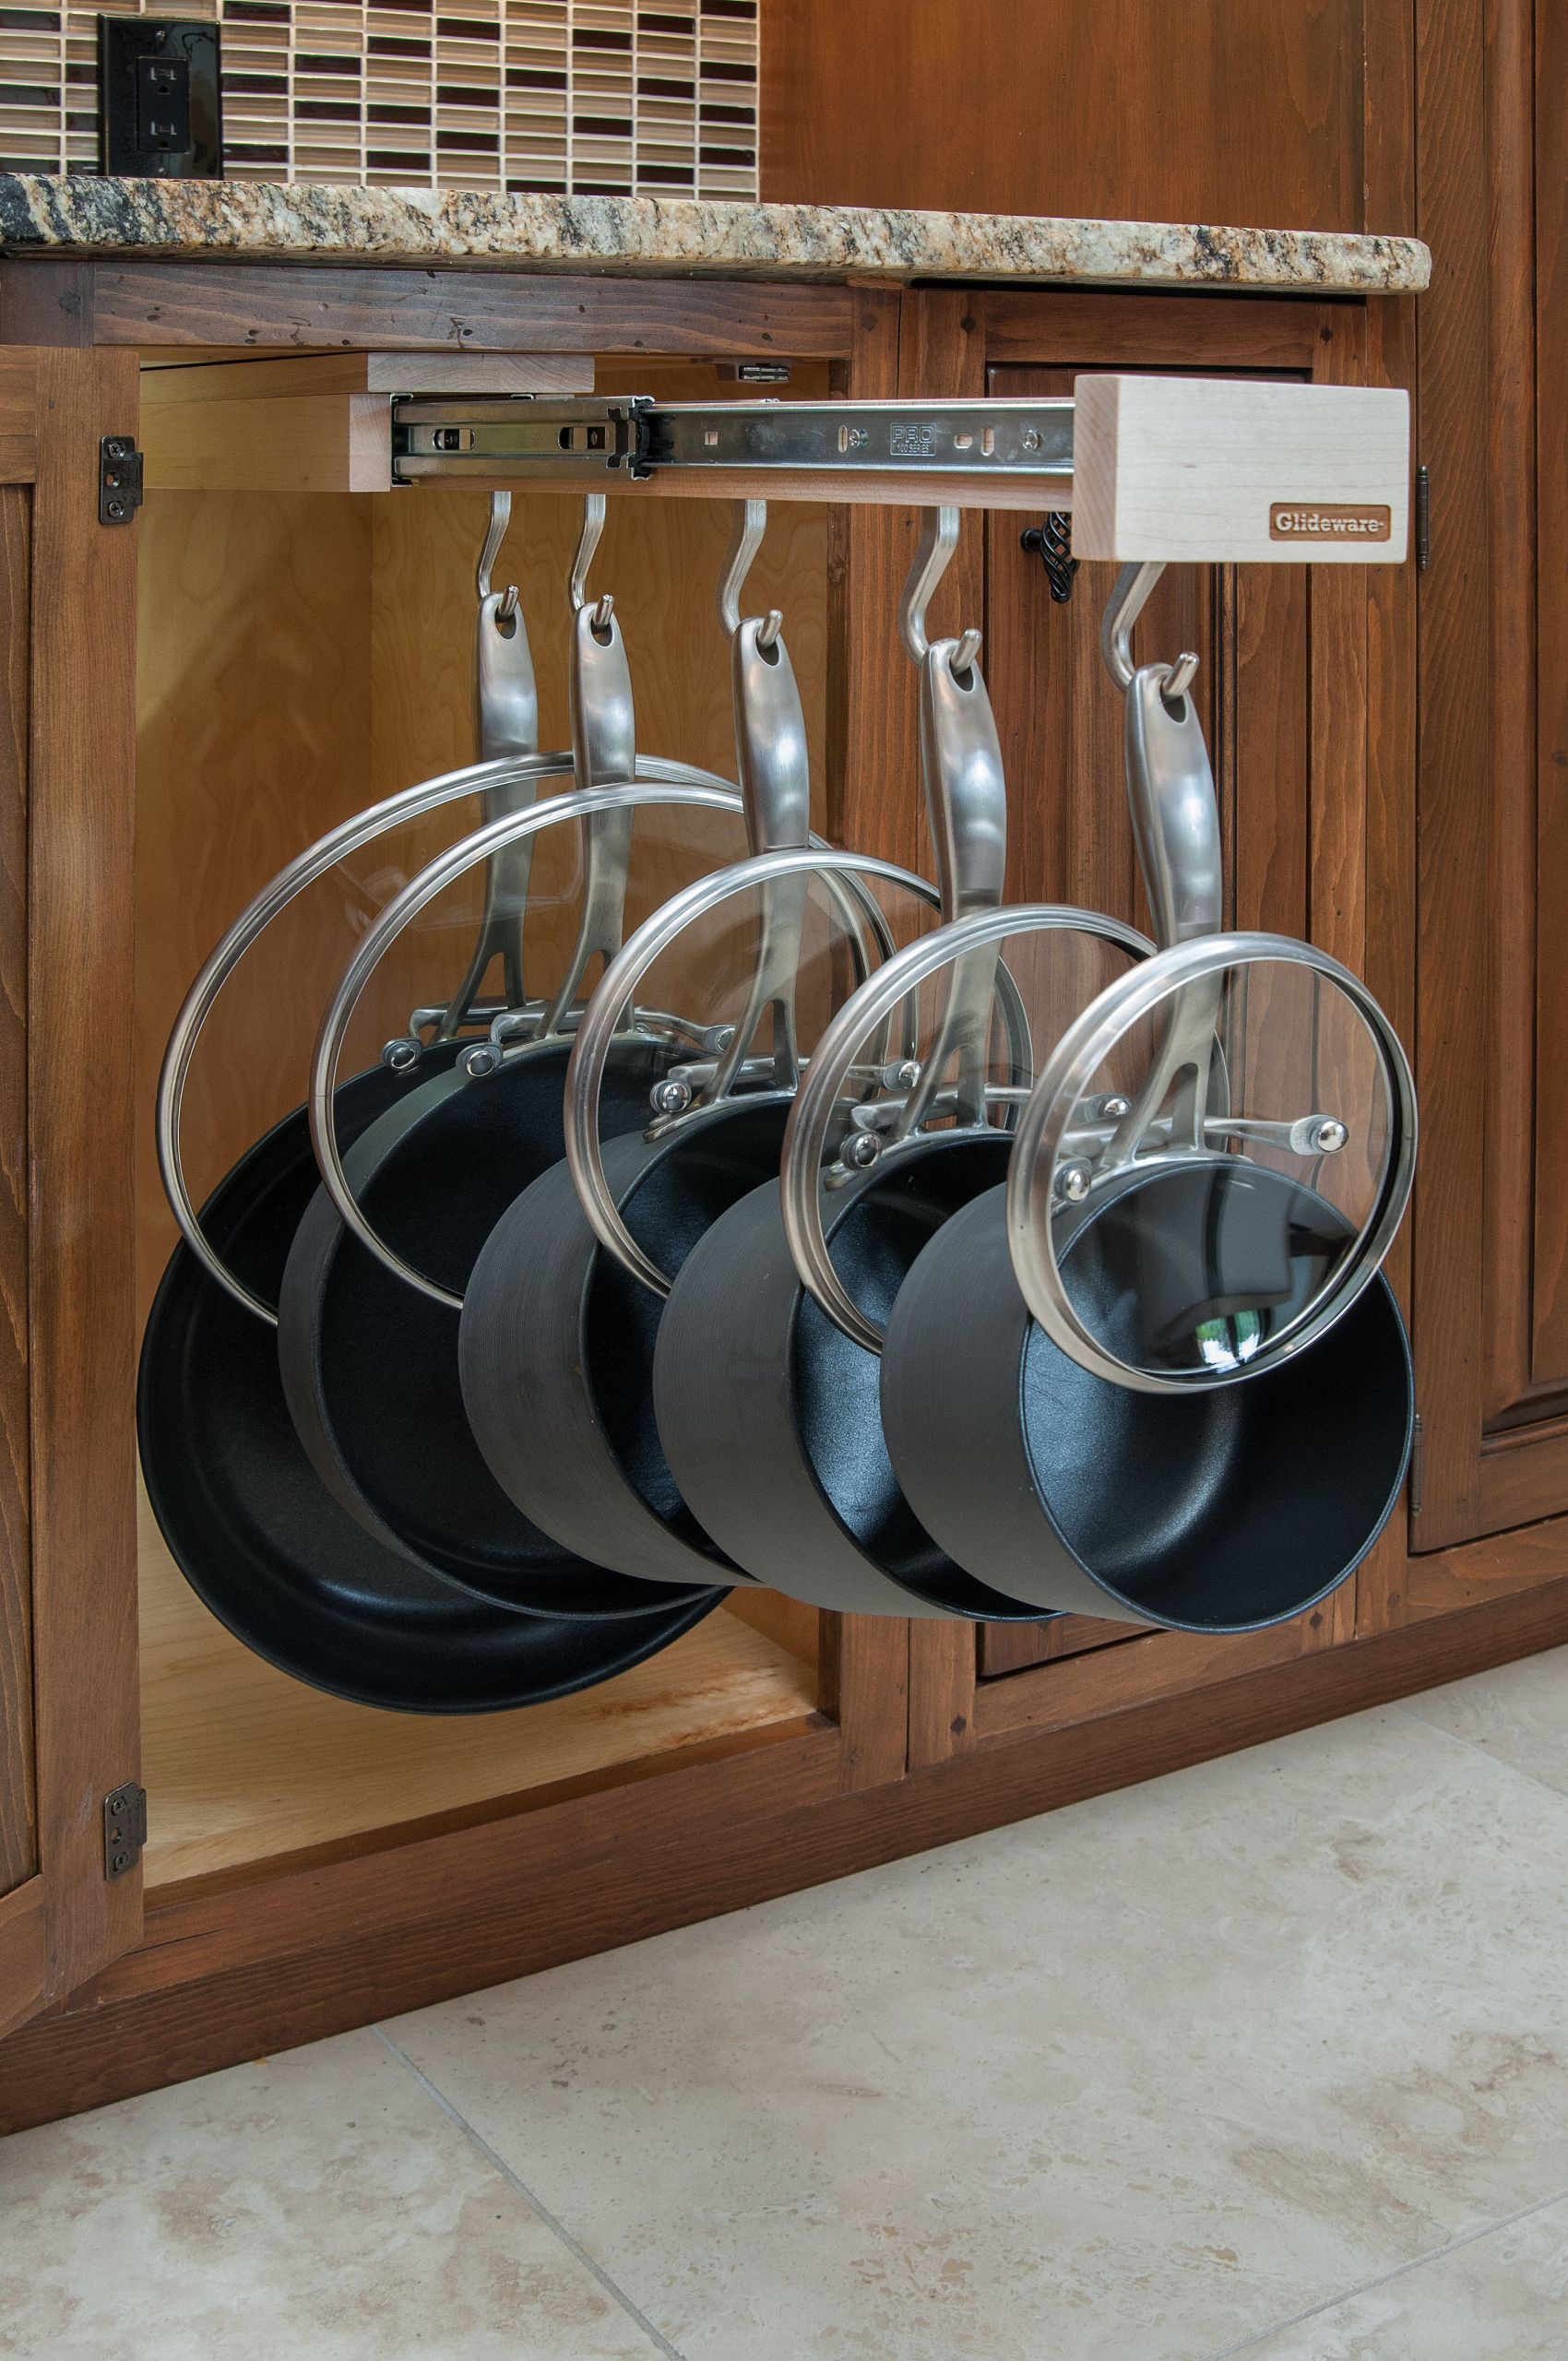 30 Ideas for Pots and Pans organizer Diy Home, Family, Style and Art